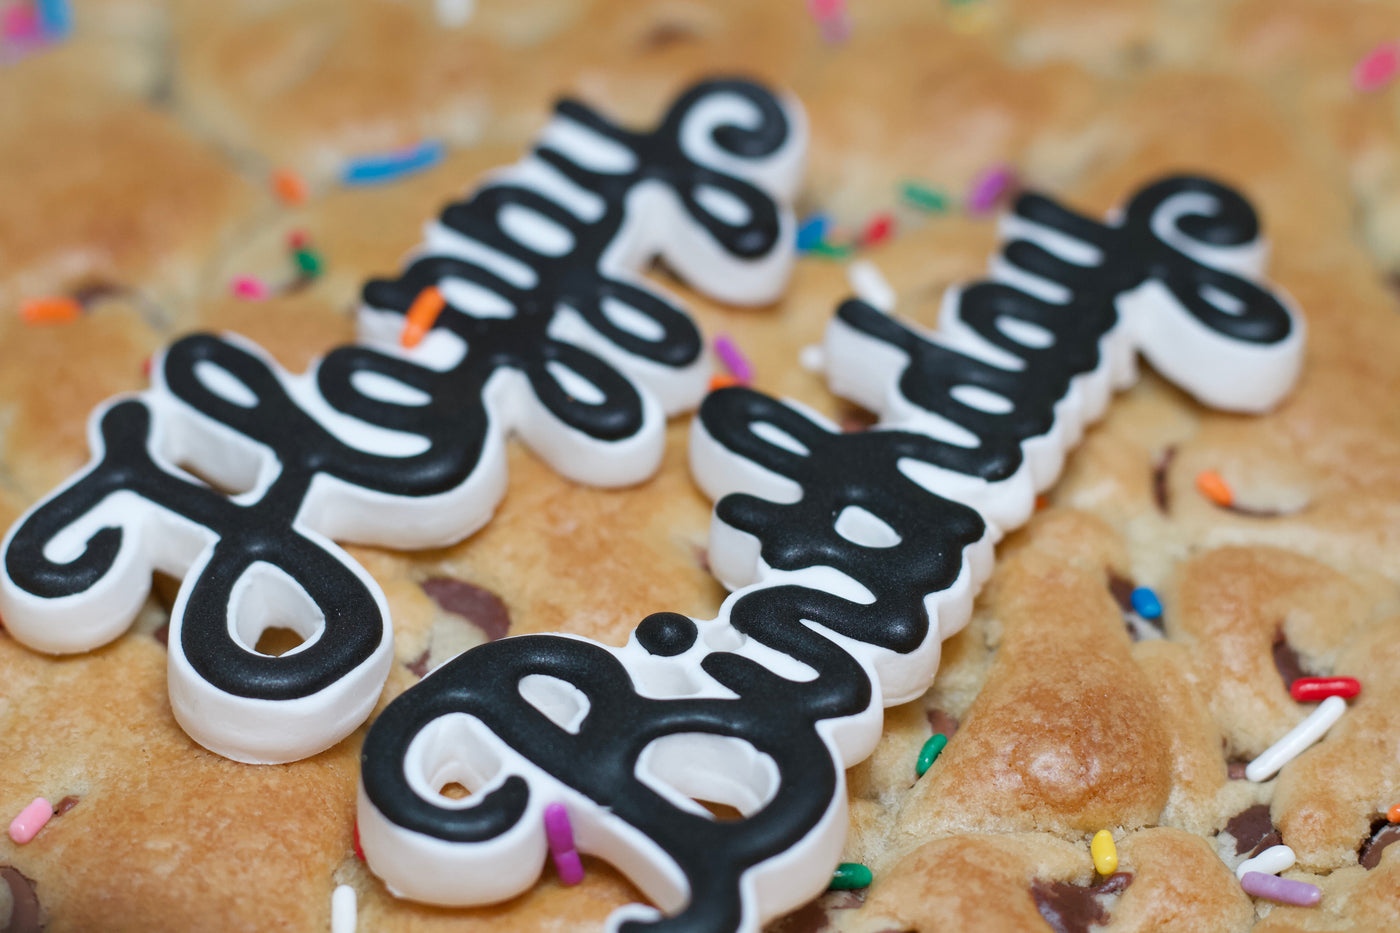 Cookie Cake with Happy Birthday On it from bake the Cookie Shoppe in Las Vegas